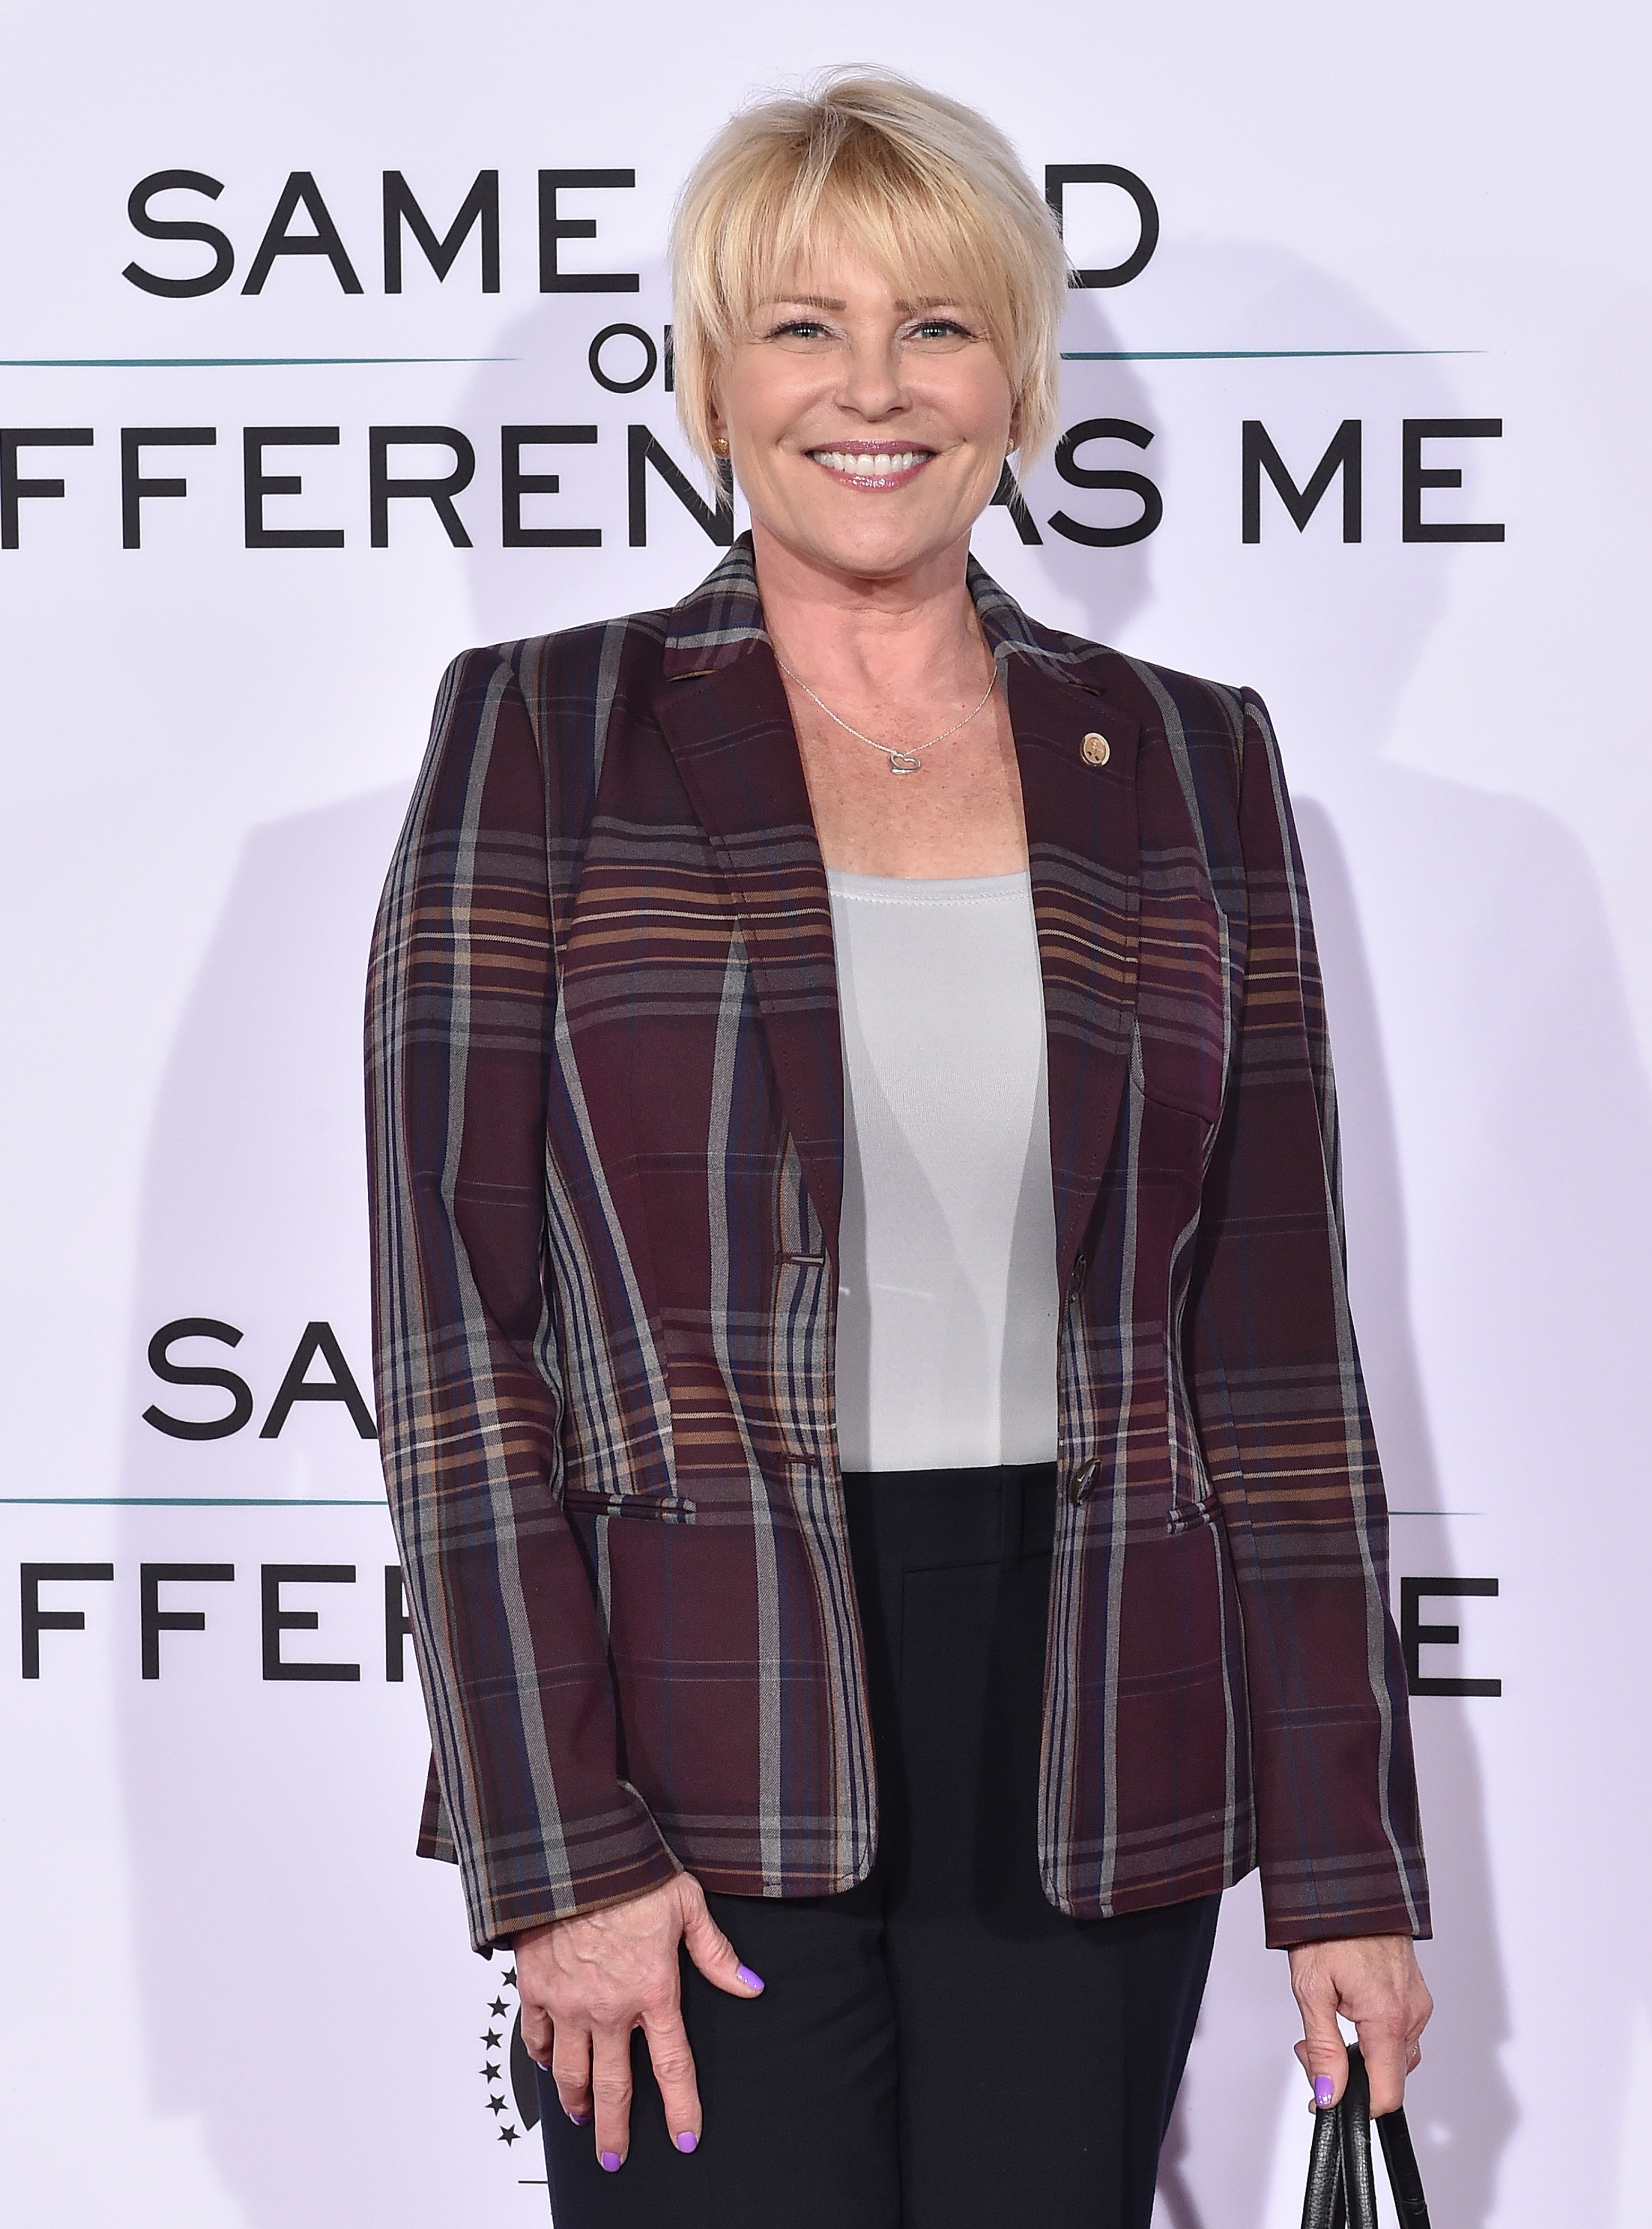 Judi Evans attends the premiere of "Same Kind of Different as Me" in Westwood, California on October 12, 2017 | Photo: Getty Images